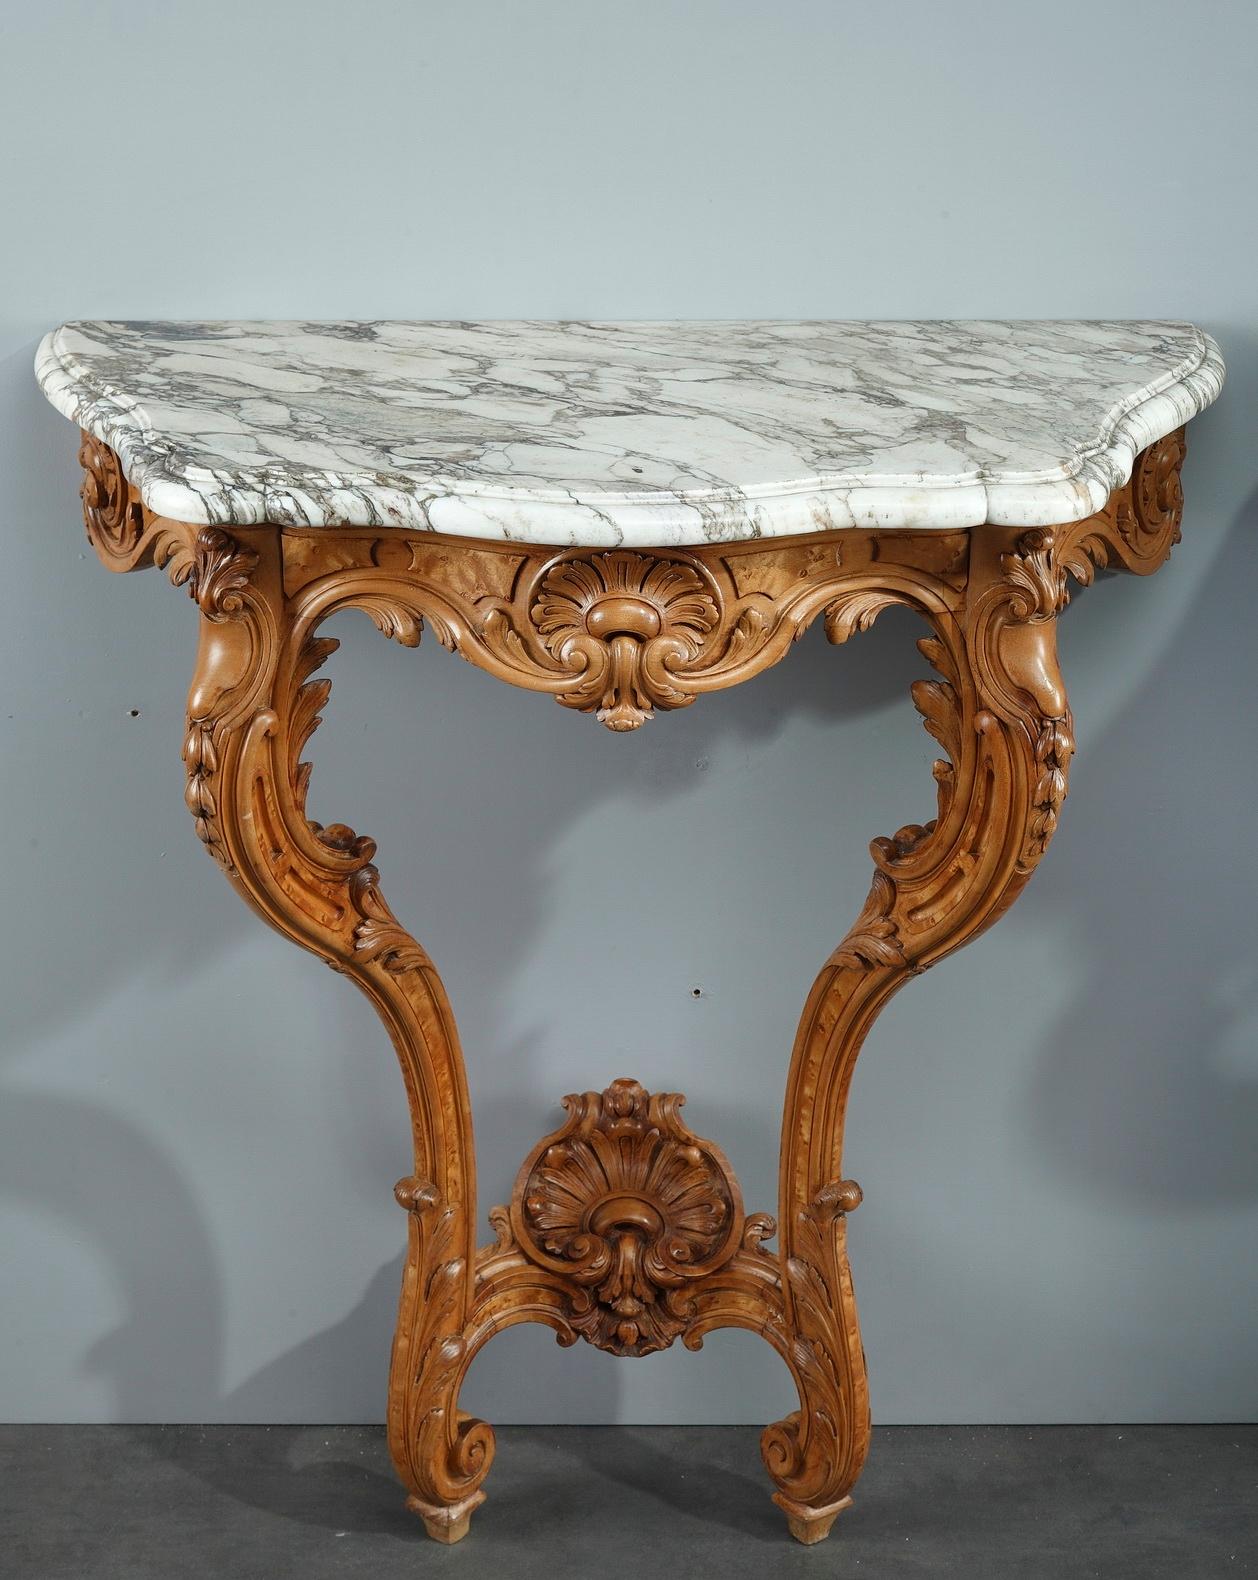 A pair of Louis XV-inspired console tables crafted of marvelously carved natural elm wood. The naturalistic seashells and scrolling acanthus leaves perfectly illustrate the Louis XV taste, largely appreciated under Napoleon III (1852-1870). Each